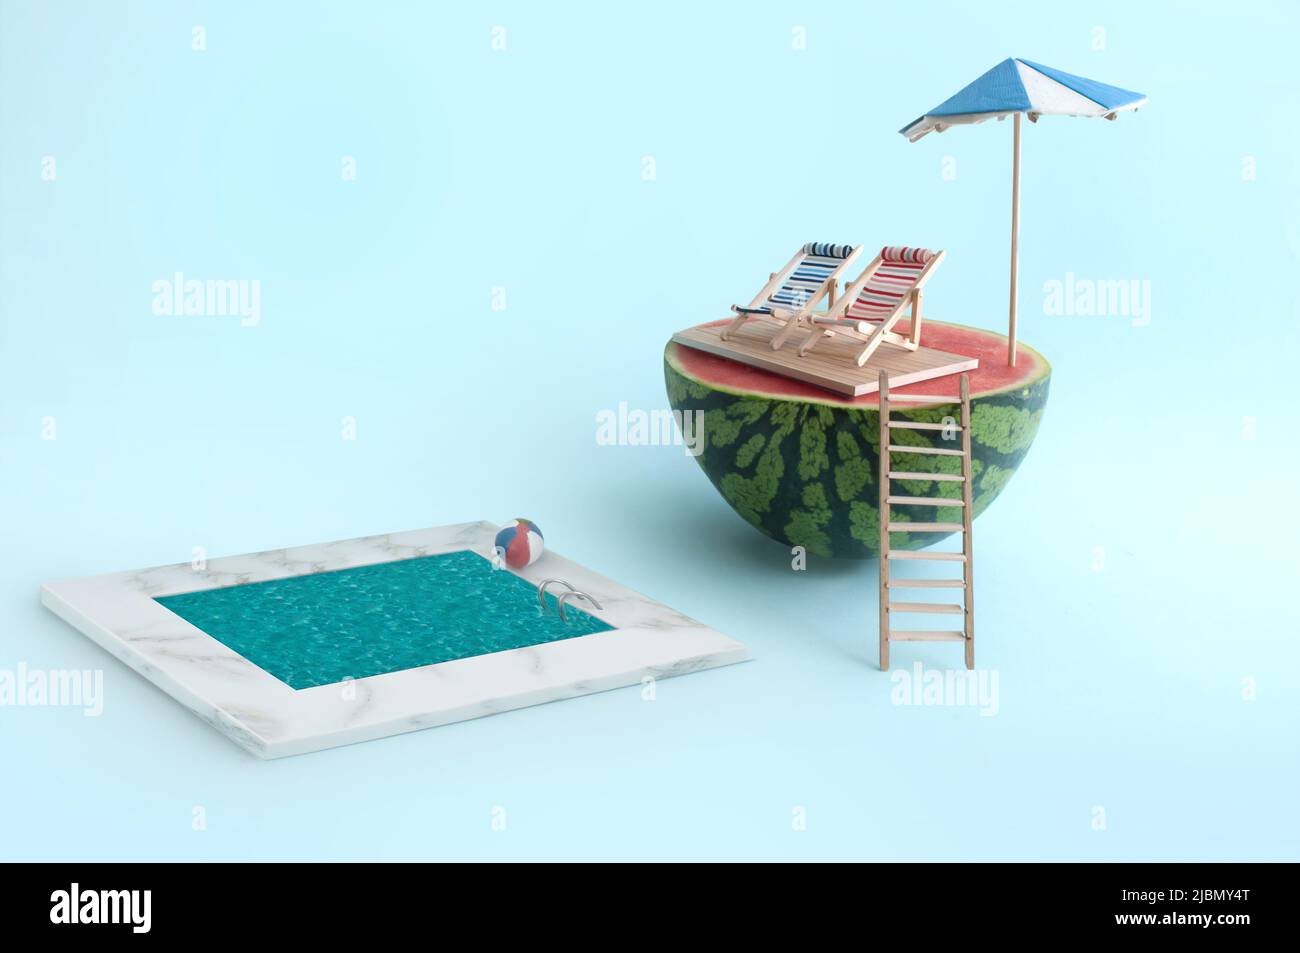 Summer beach holiday concept, watermelon with parasol and two deck chairs near to a swimming pool Stock Photo